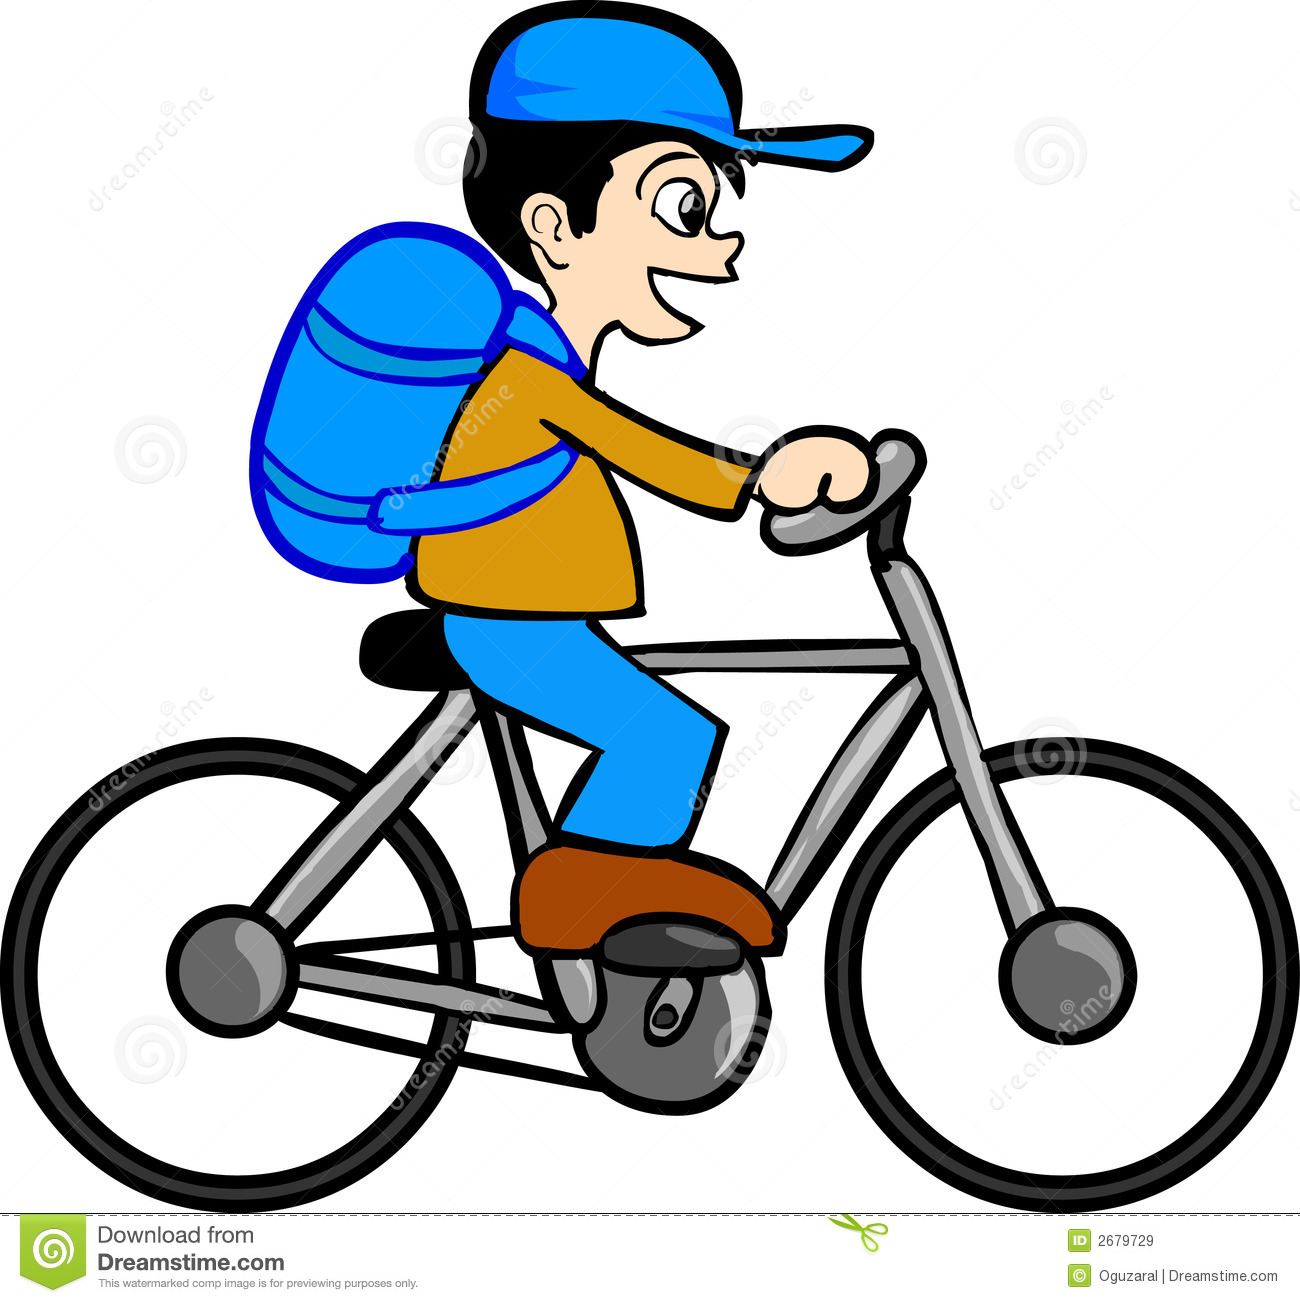 Bicycle clipart clipartlook.